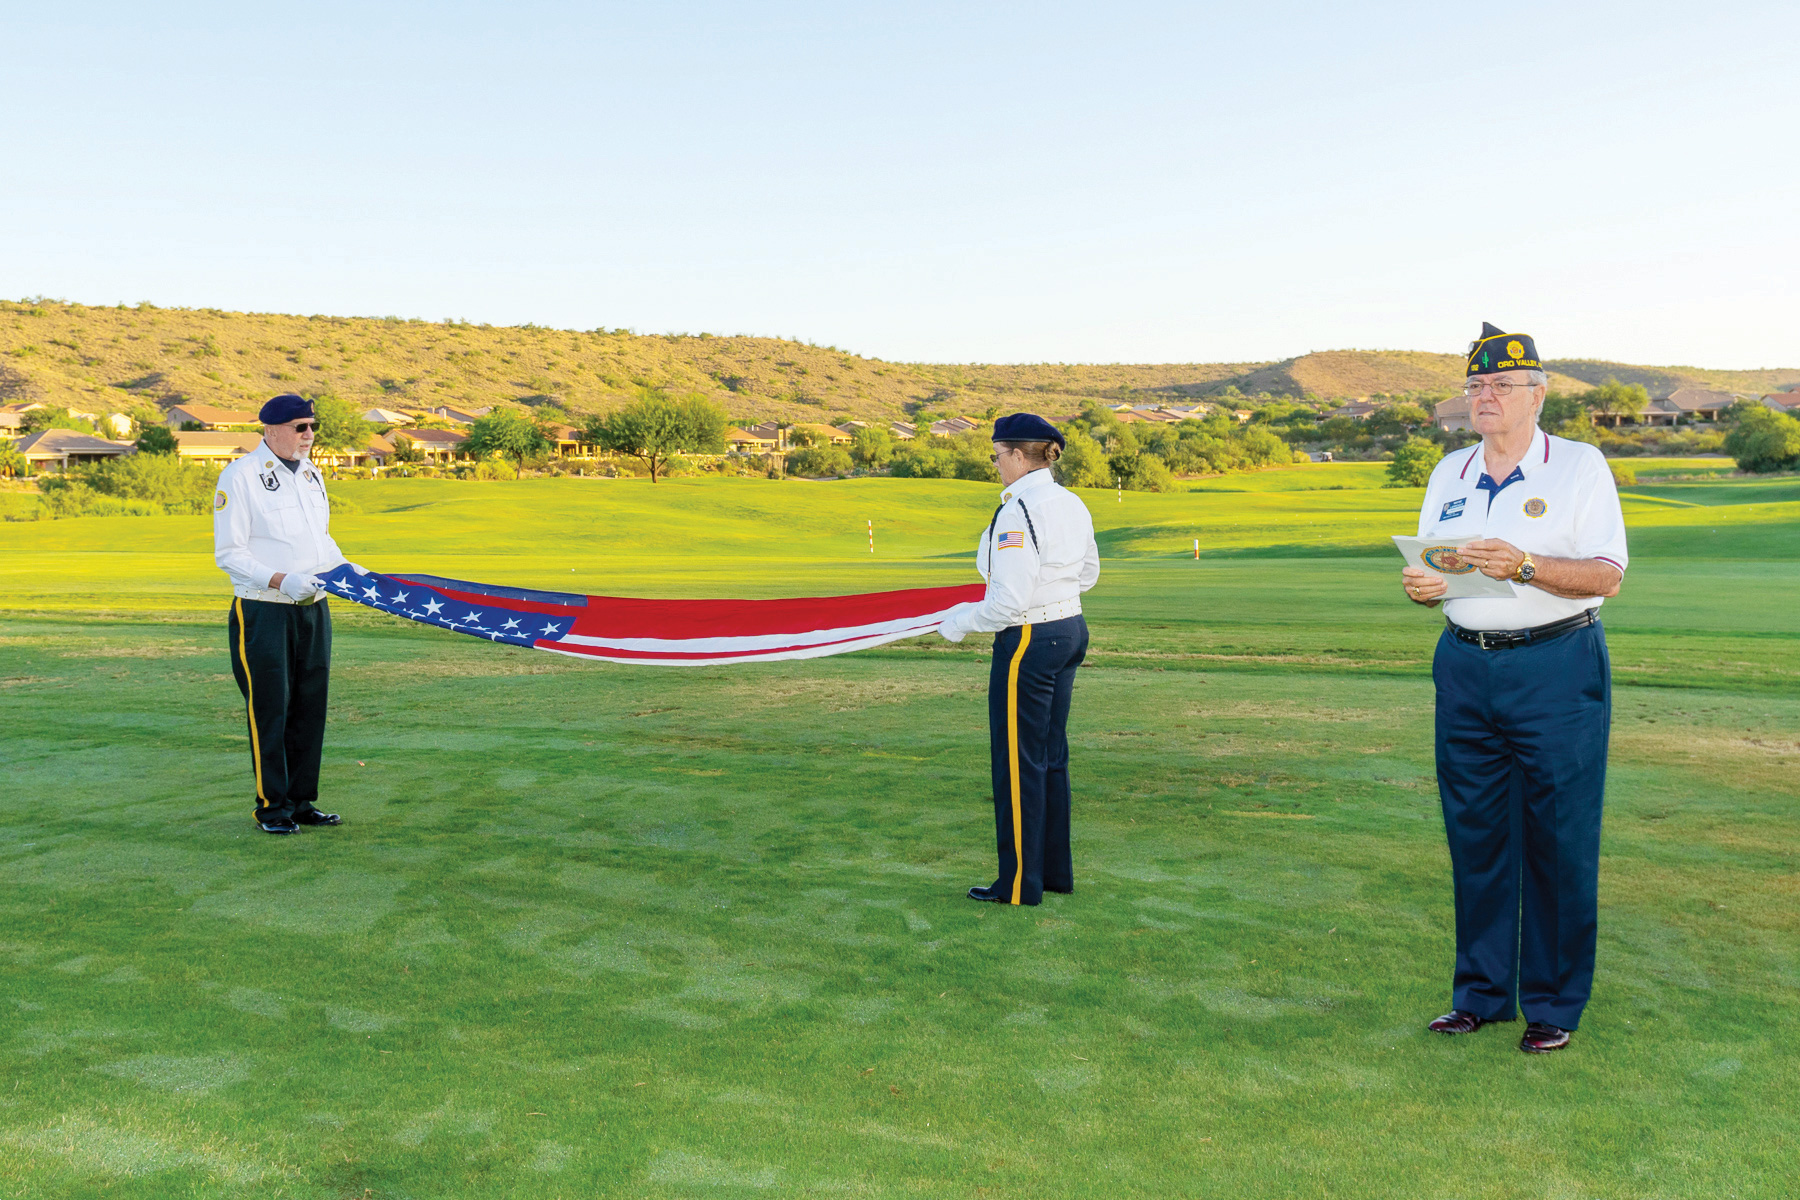 A beautiful morning eased in as Commander Wayne Larroque and members of the Oro Valley American Legion paid tribute to our military families prior to the Patriotic Golf Day event. (Photo by Bill George)